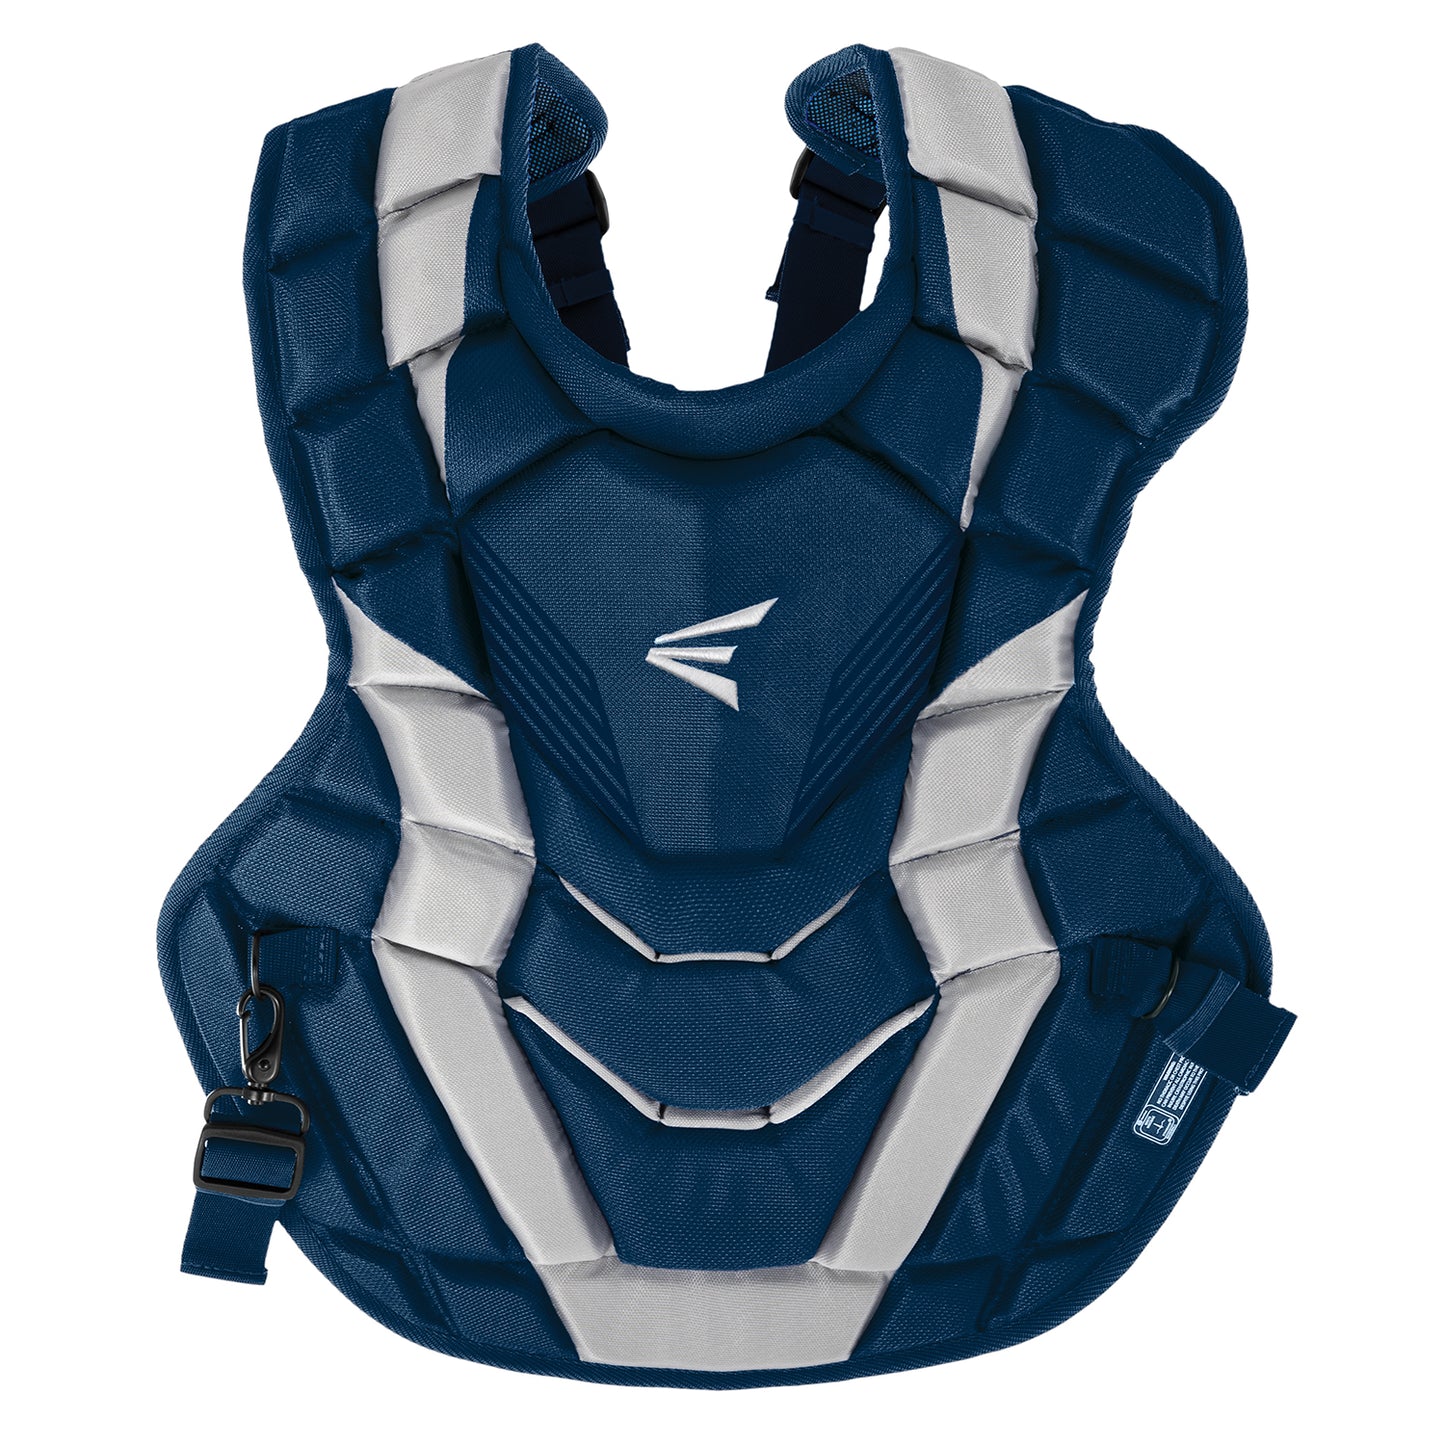 easton-m10-youth-chest-protector-a165335